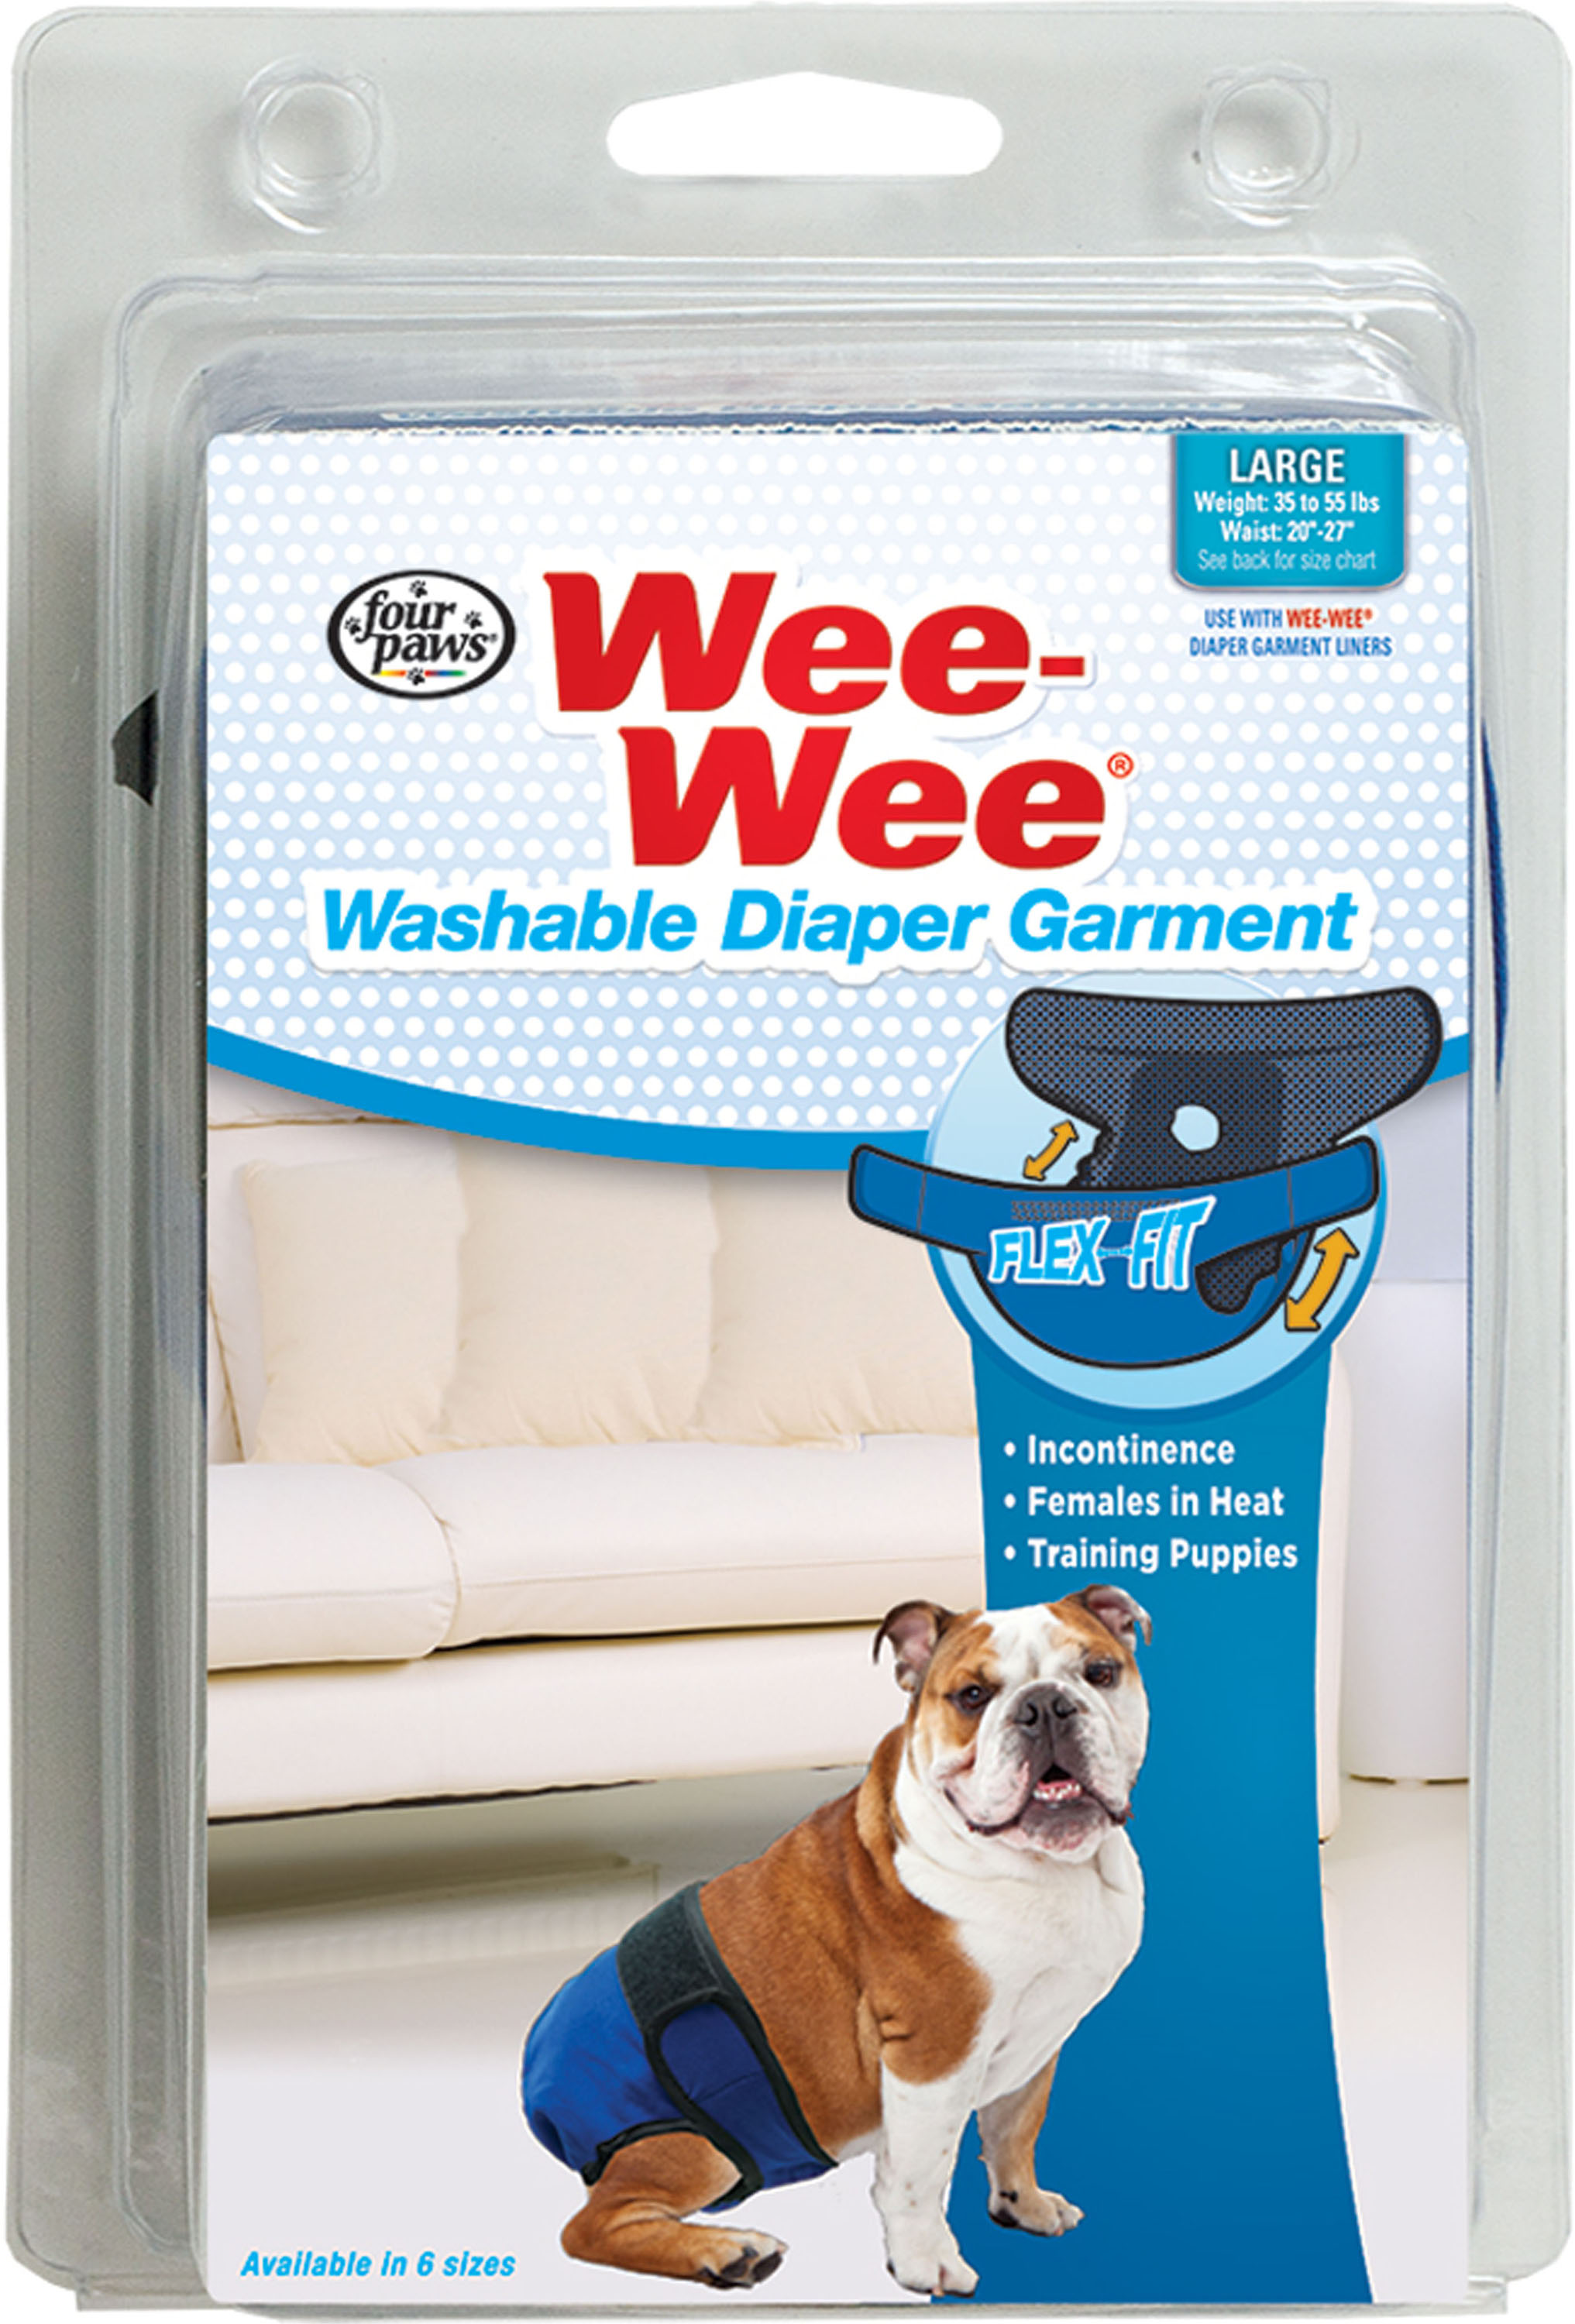 Wee Wee Washable Diaper Garment (Option 1: Large)